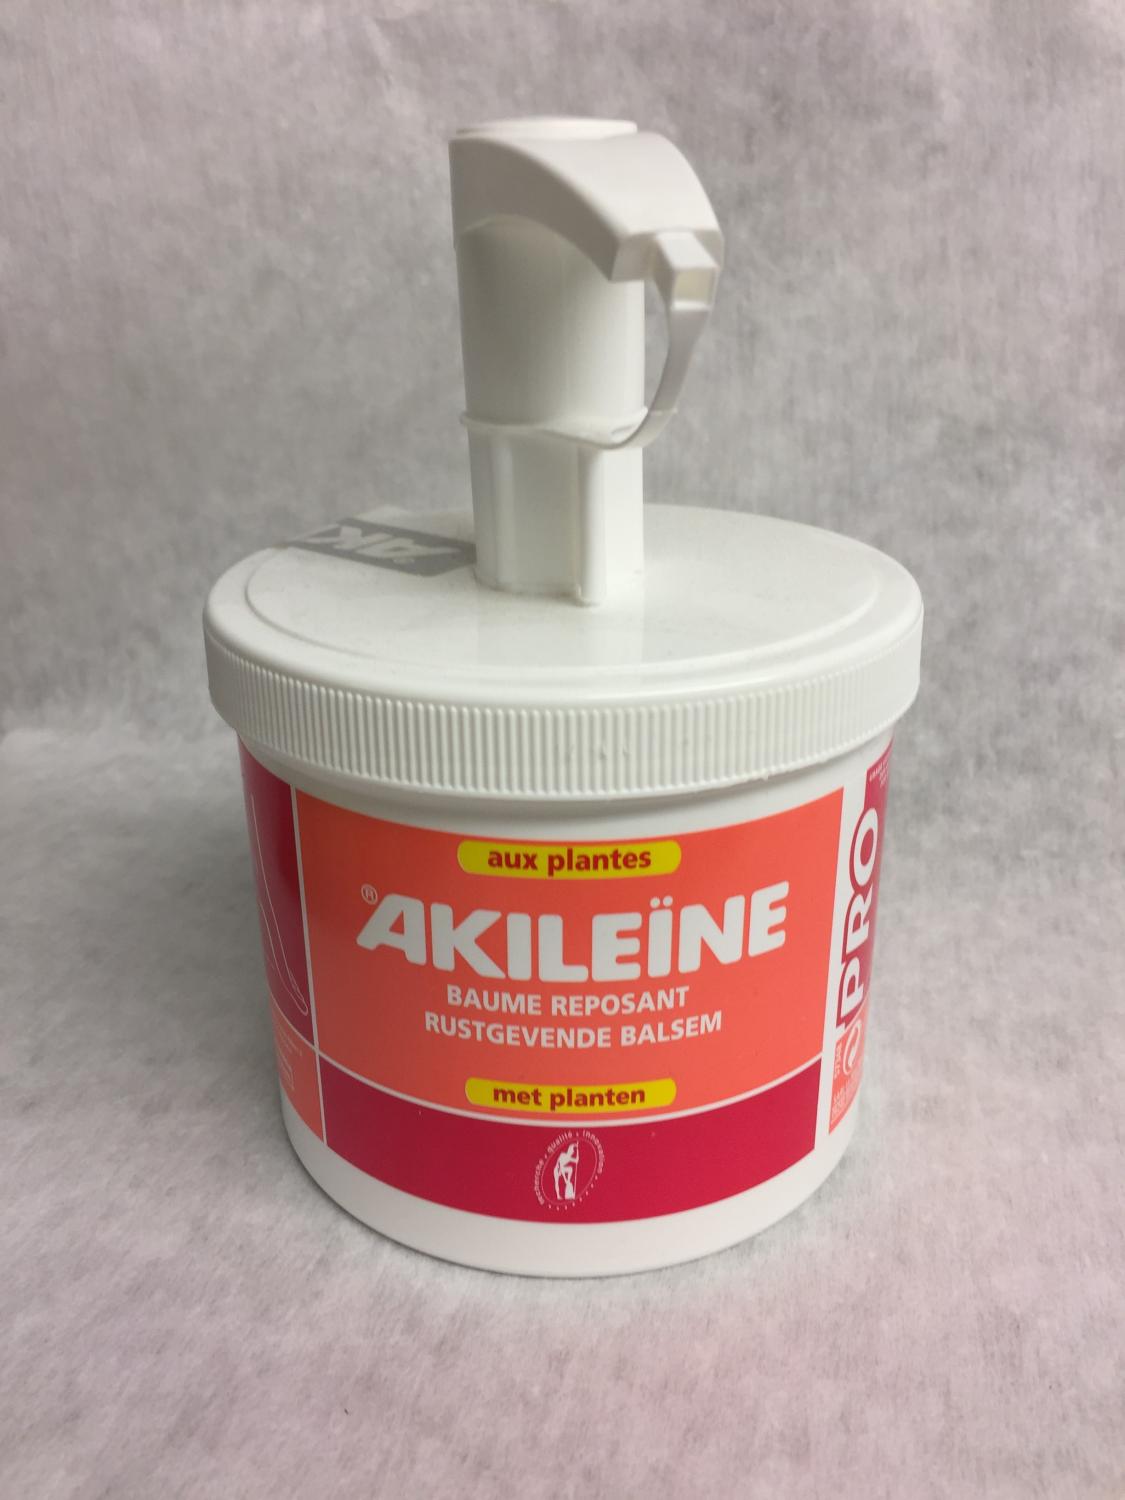 Akileine Relaxing Balm with Plants 500ml